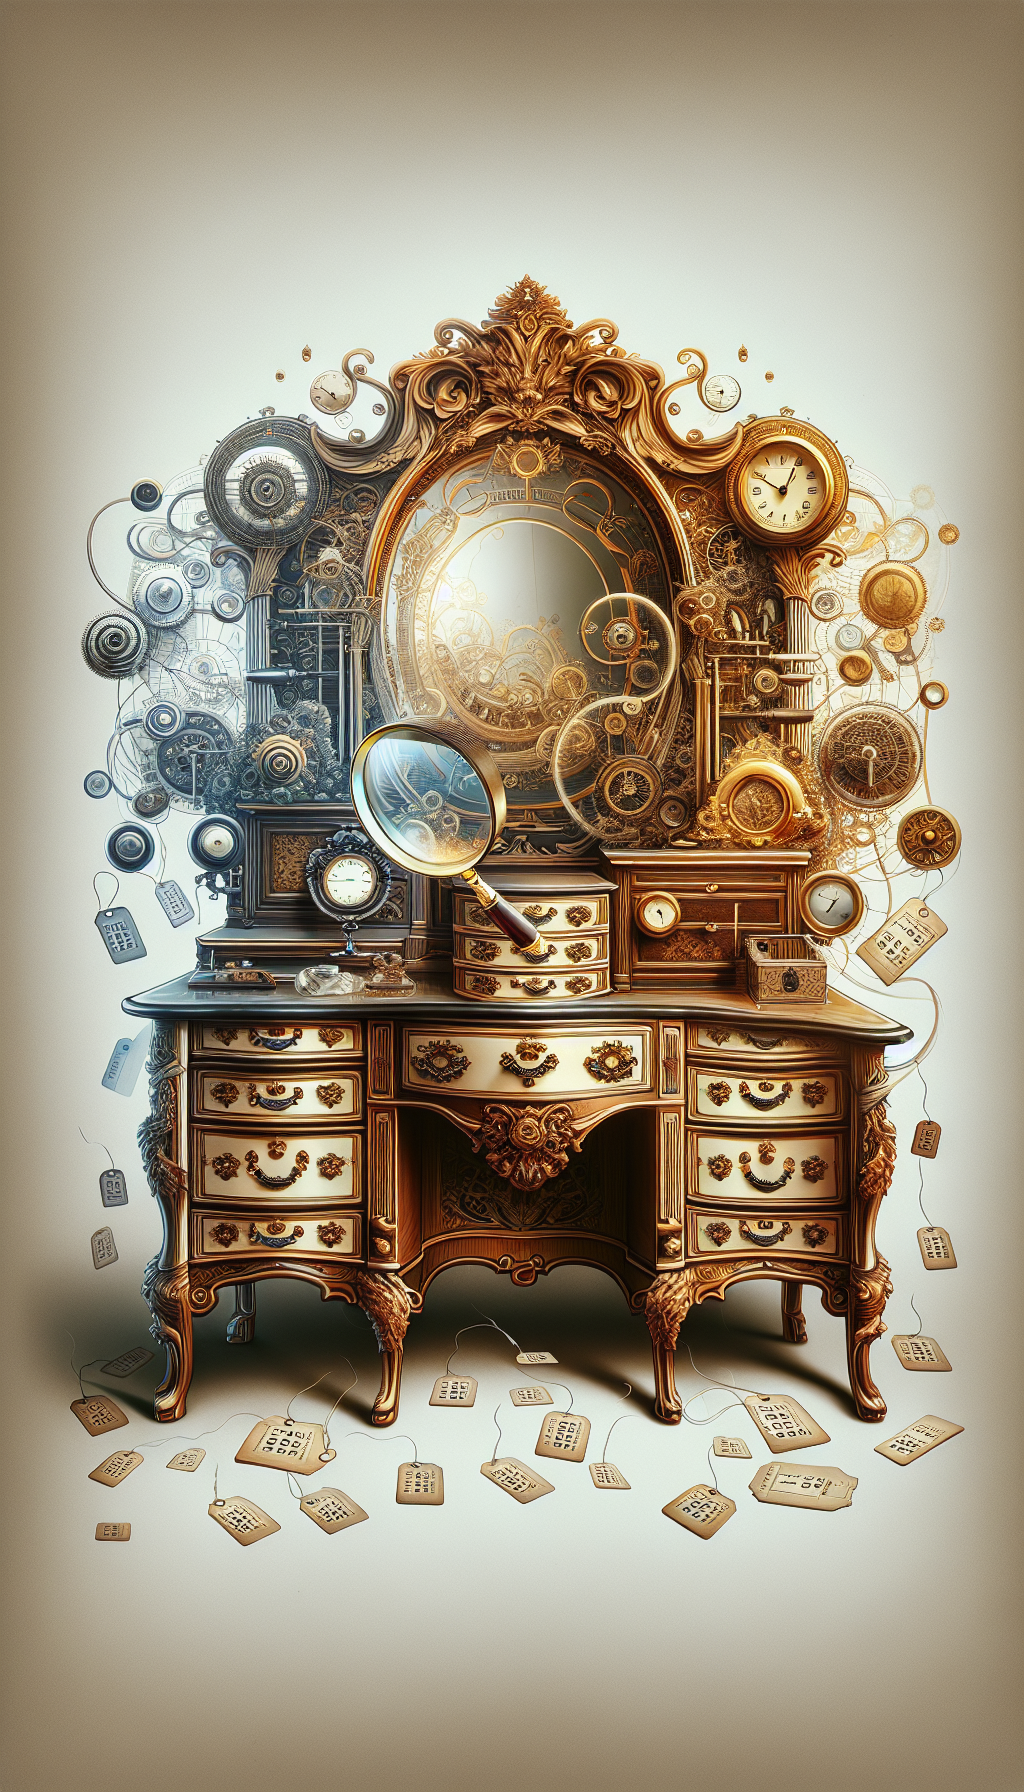 An opulent, intricately designed antique dresser with a gilded mirror stands at the center, overlaid with translucent clockwork and calendar pages to signify the passage of time. A magnifying glass hovers over, focusing on styles from different eras—Art Nouveau curves, Victorian ornamentation, and Georgian simplicity—underscored by small price tags fluttering to show fluctuating values through the ages.